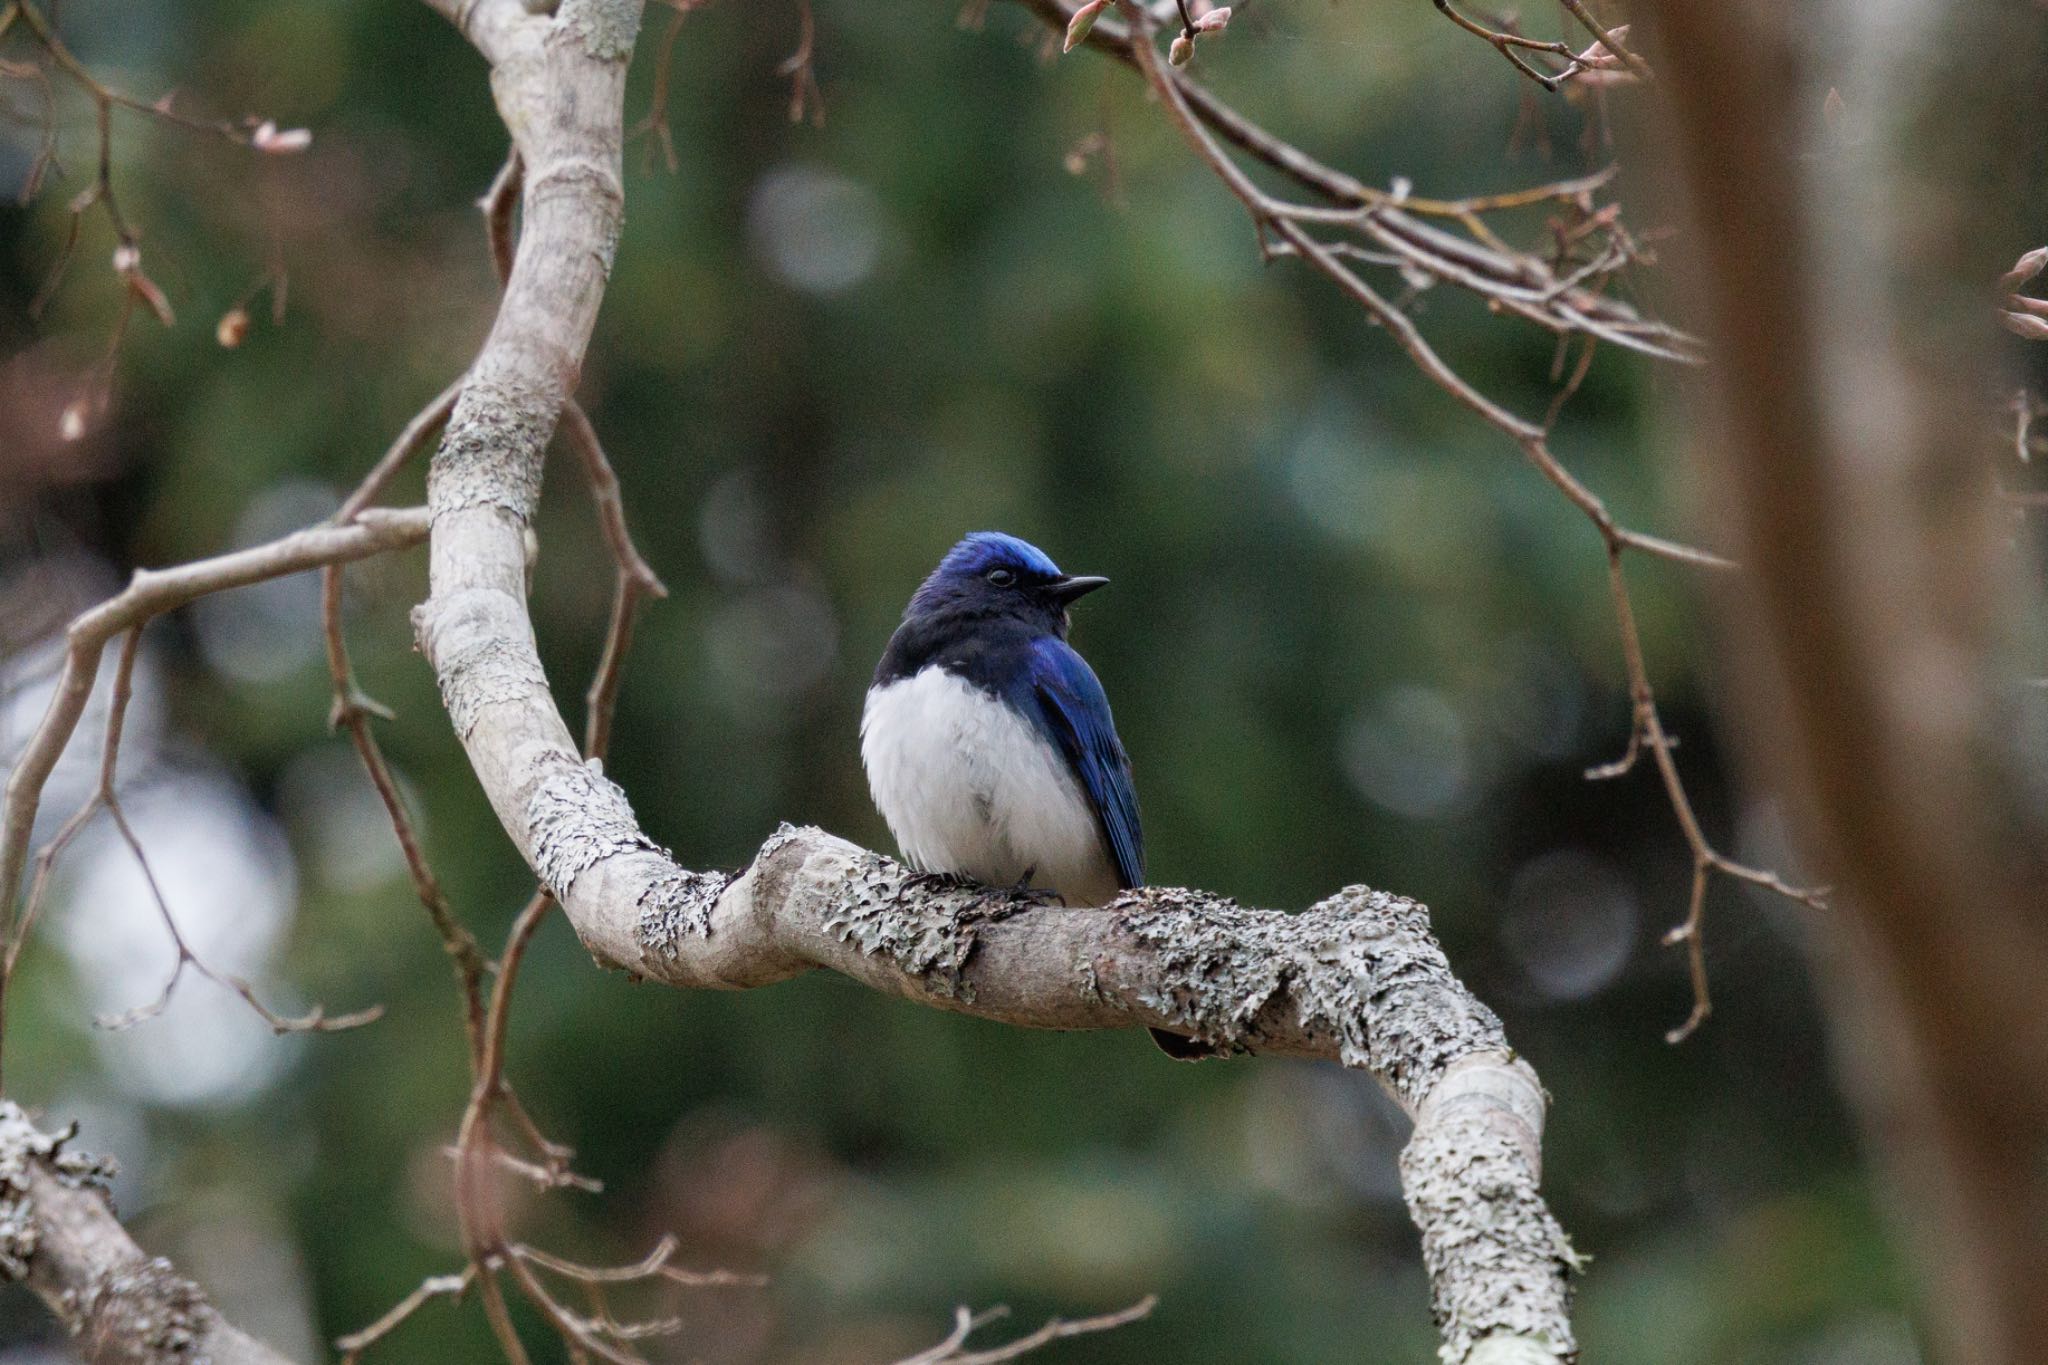 Photo of Blue-and-white Flycatcher at Tomakomai Experimental Forest by シマシマ38